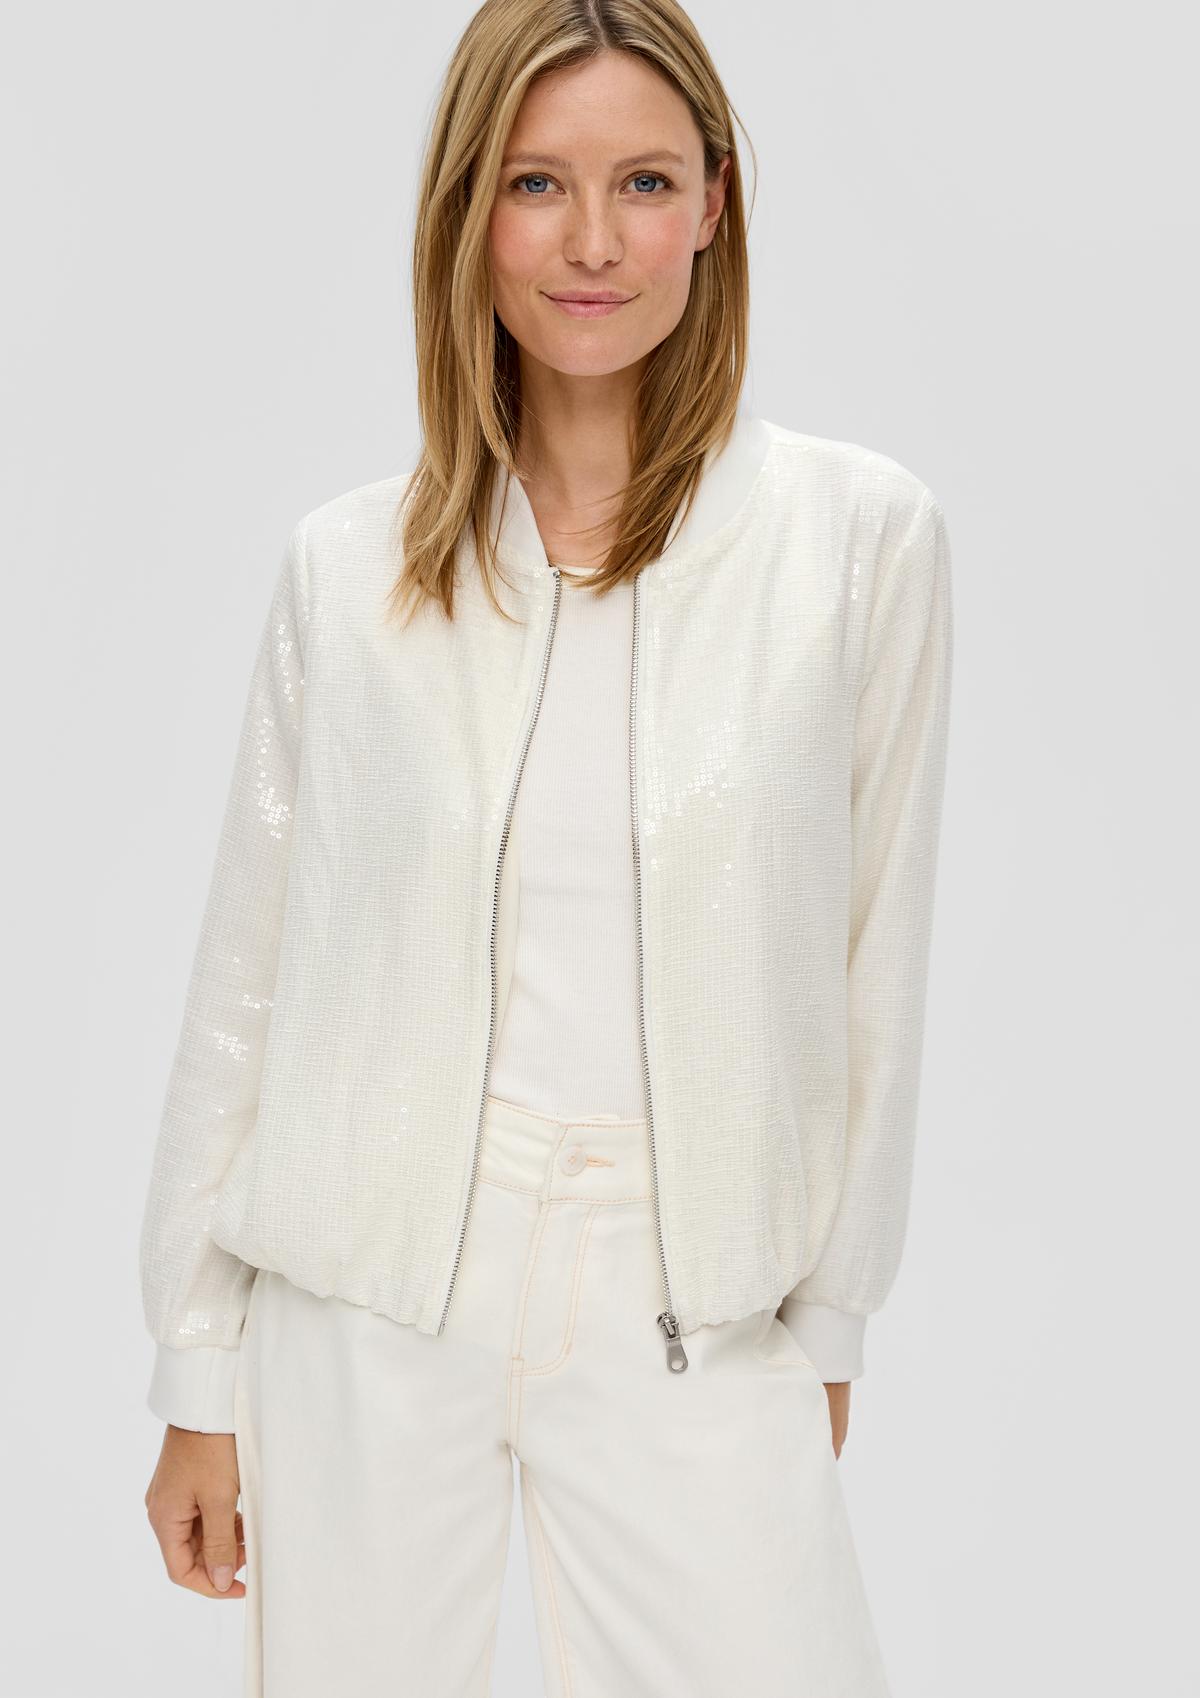 s.Oliver Bomber jacket with sequins